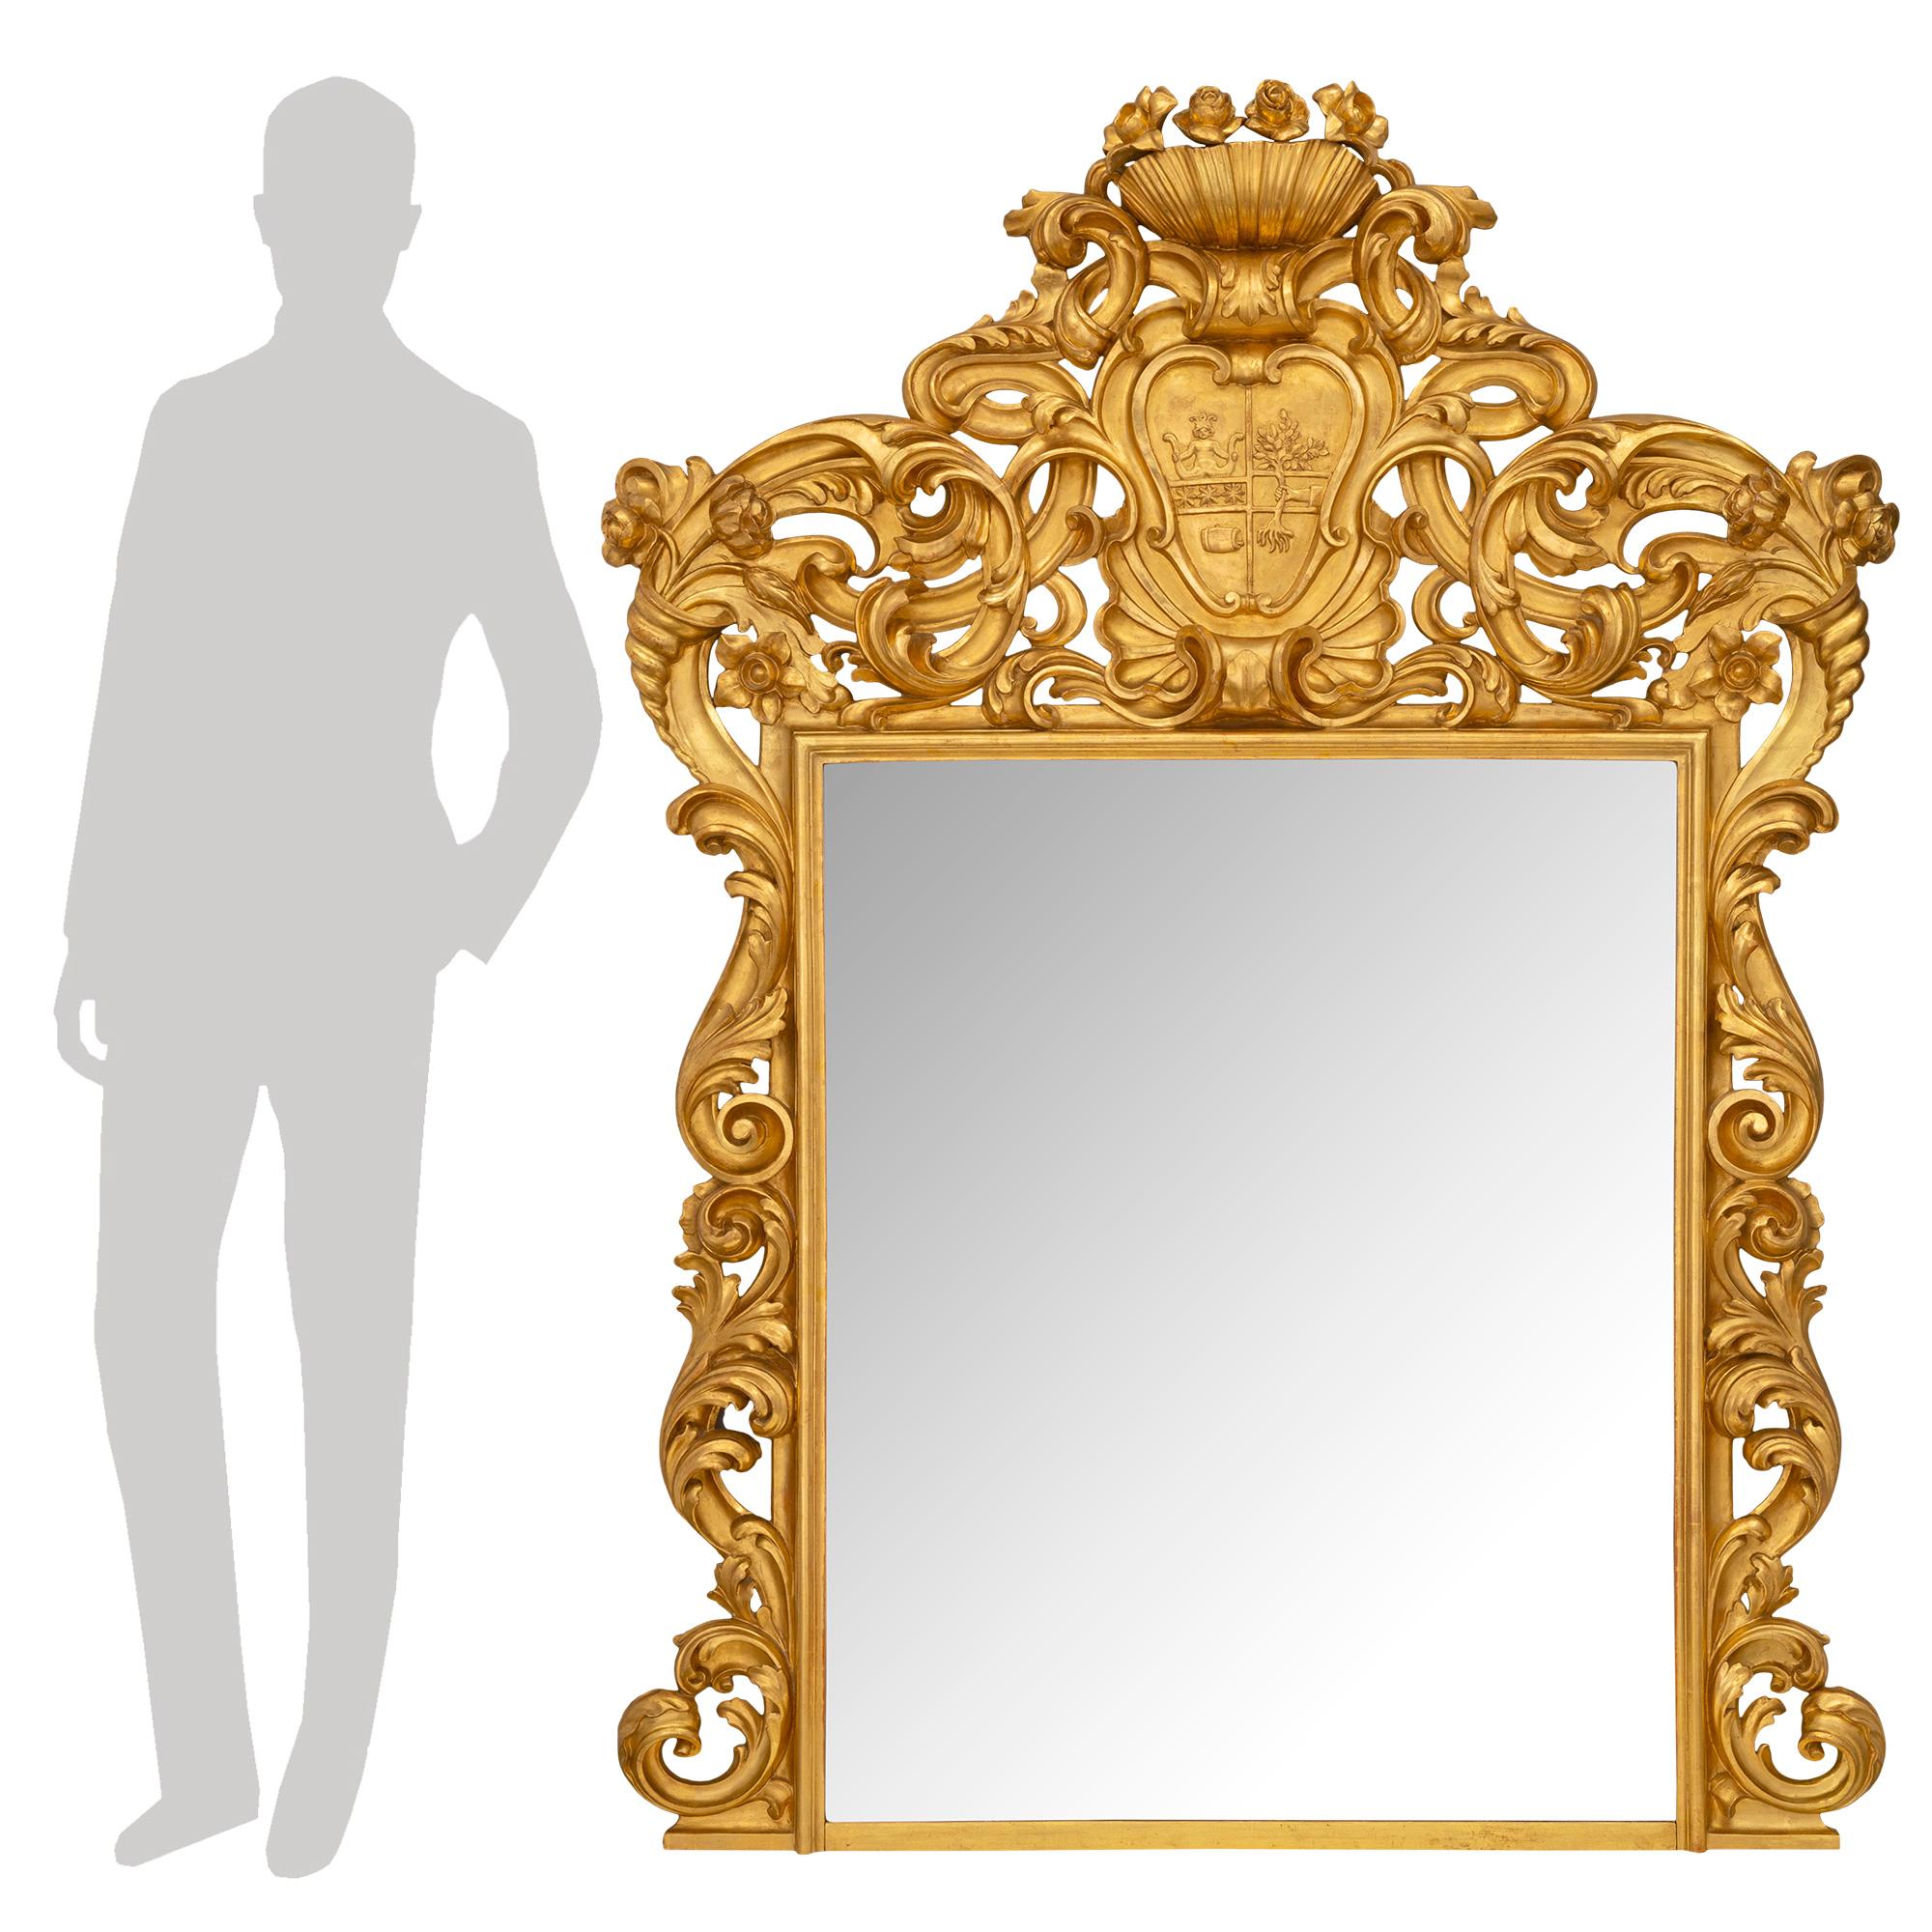 A beautiful Italian turn of the century Roman giltwood mirror. The original mirror plate is fitted within a fine mottled giltwood frame with stunning pierced scrolled foliate movements leading up each side above a fine straight base. The majestic